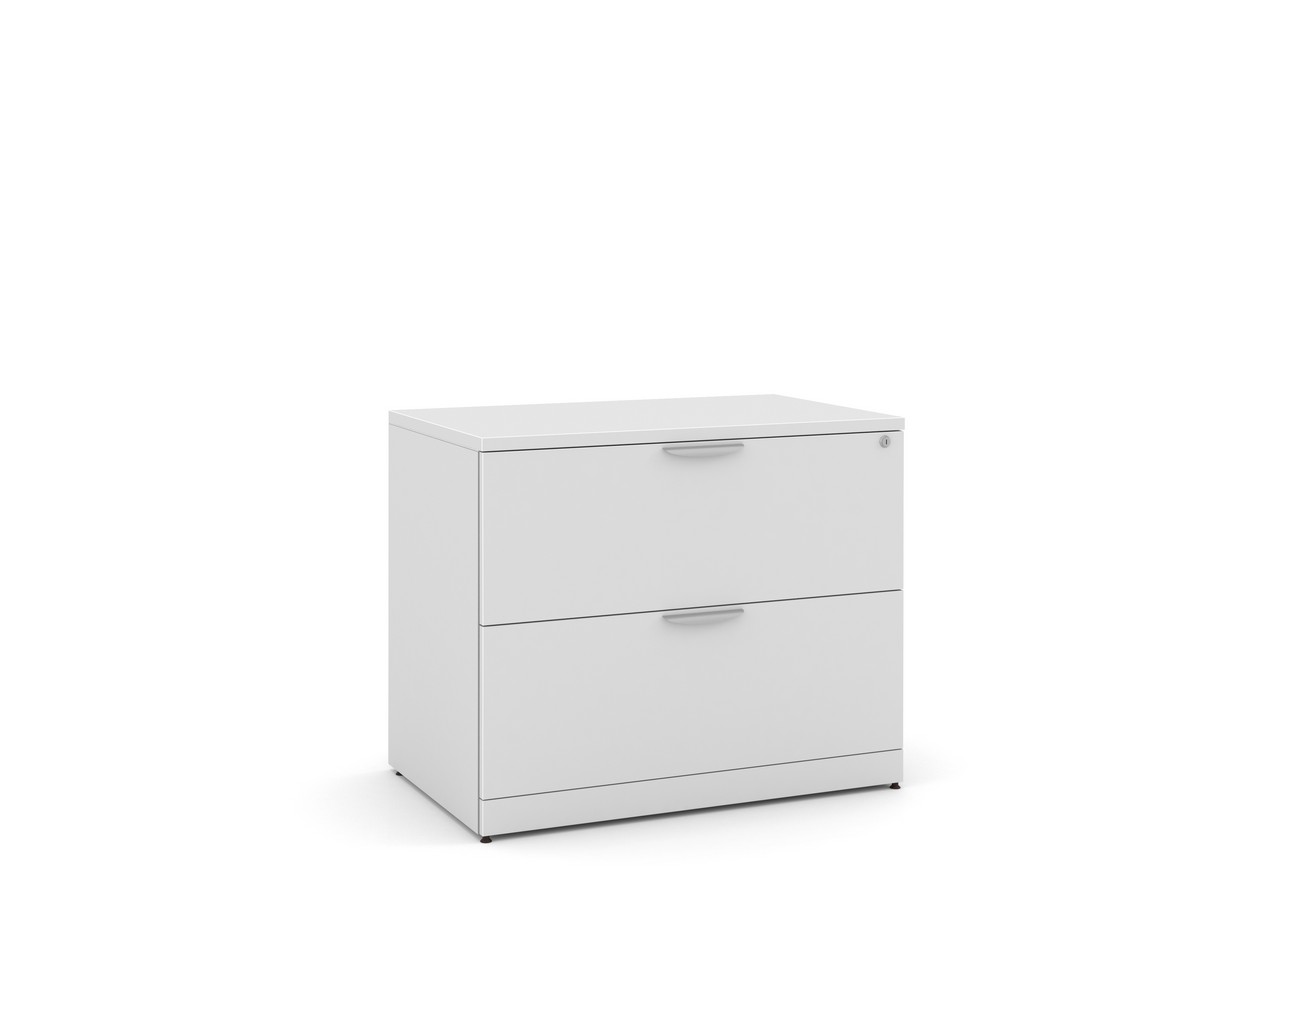 2 Drawer Lateral Filing Cabinet with White Finish